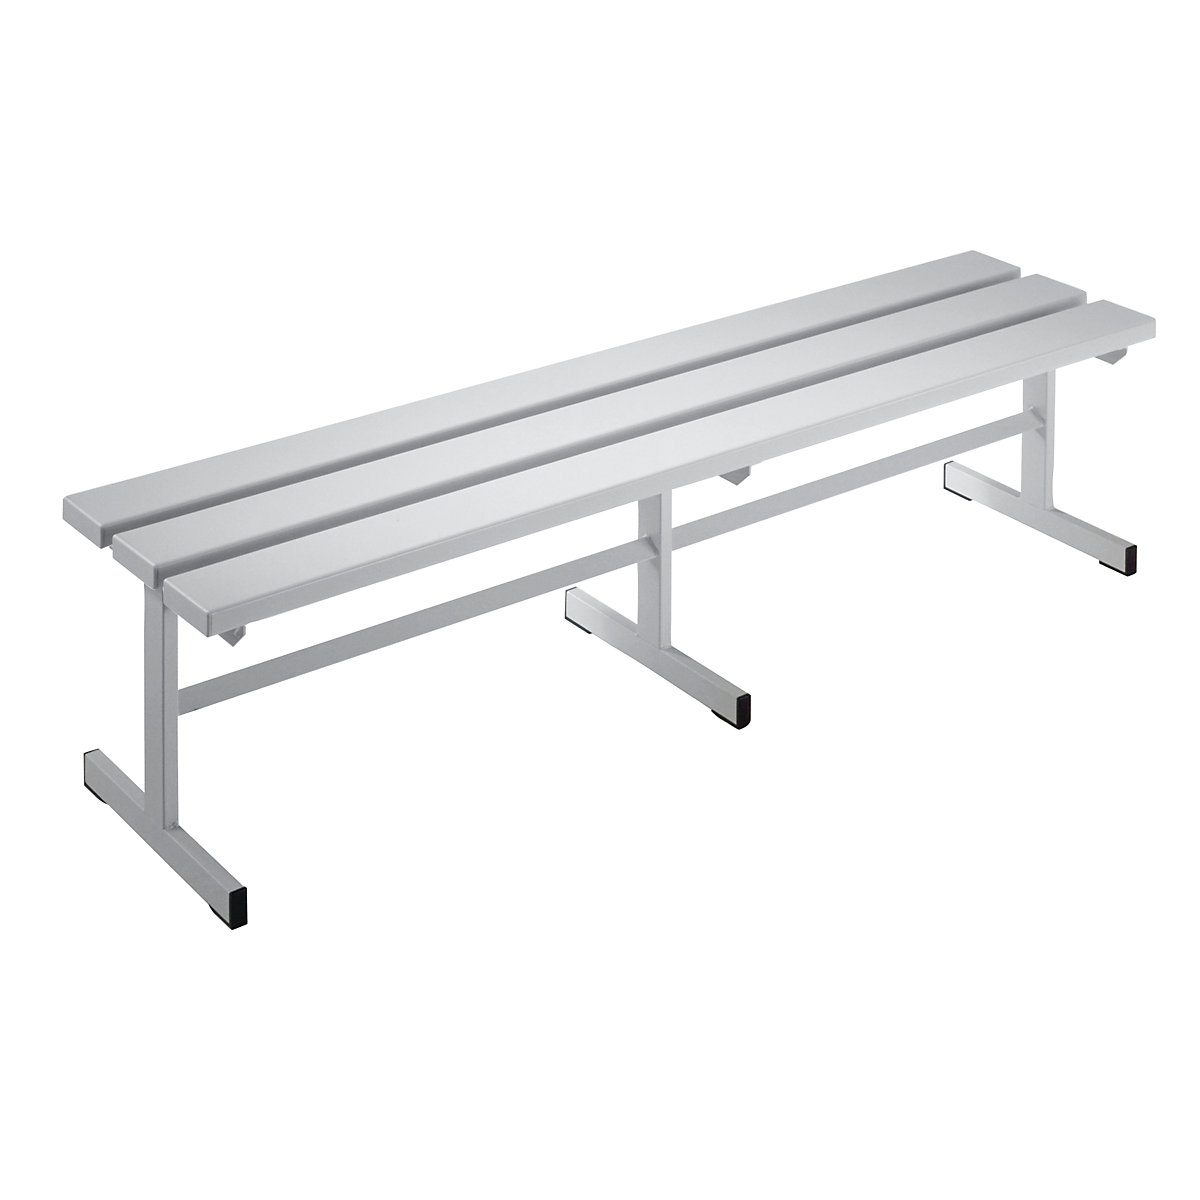 Wolf – Cloakroom bench, single sided seat, light grey, 1500 mm length